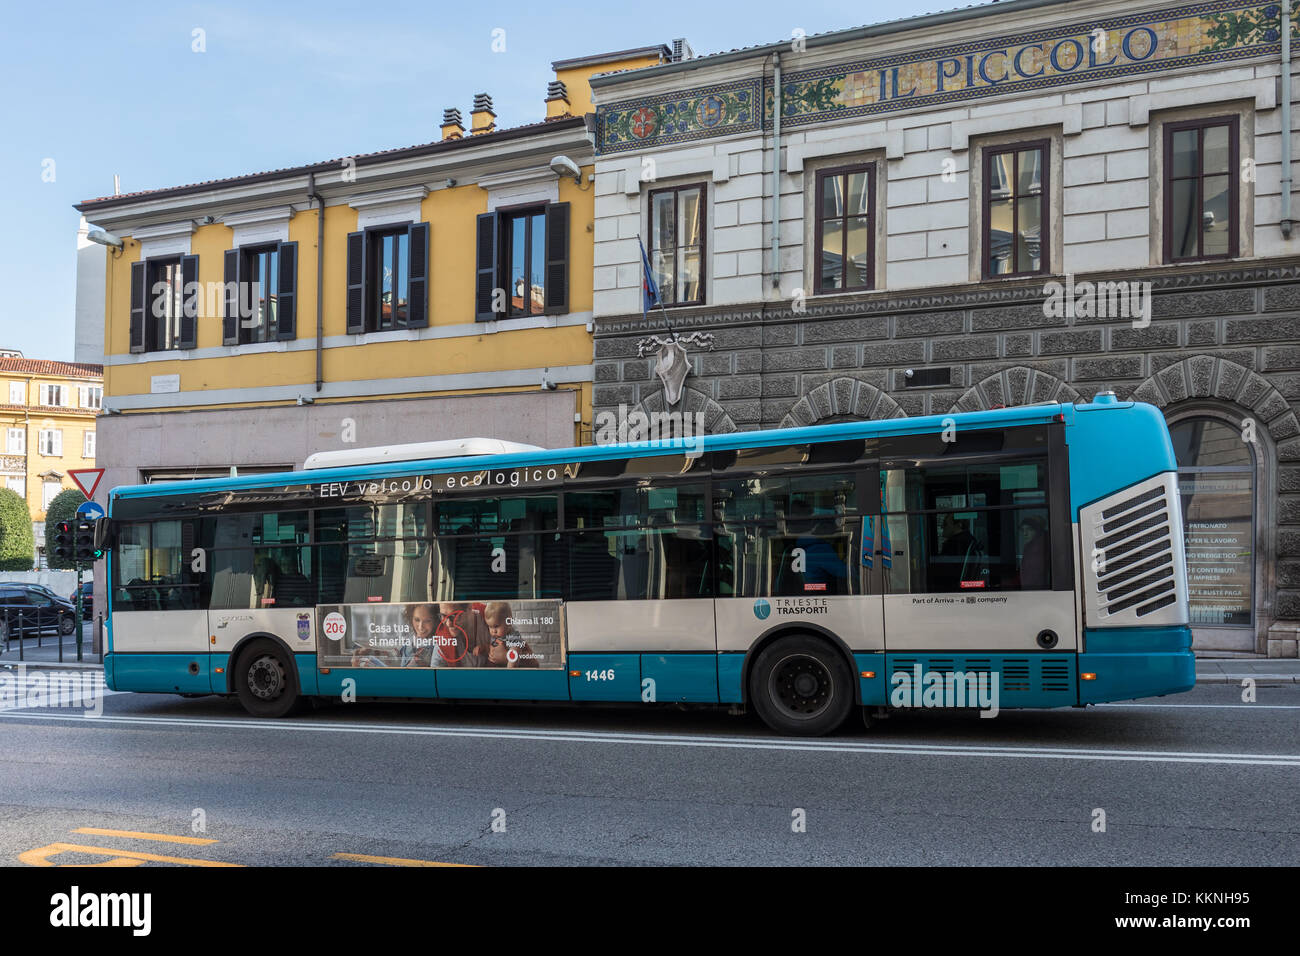 Local bus in Trieste, Italy Stock Photo